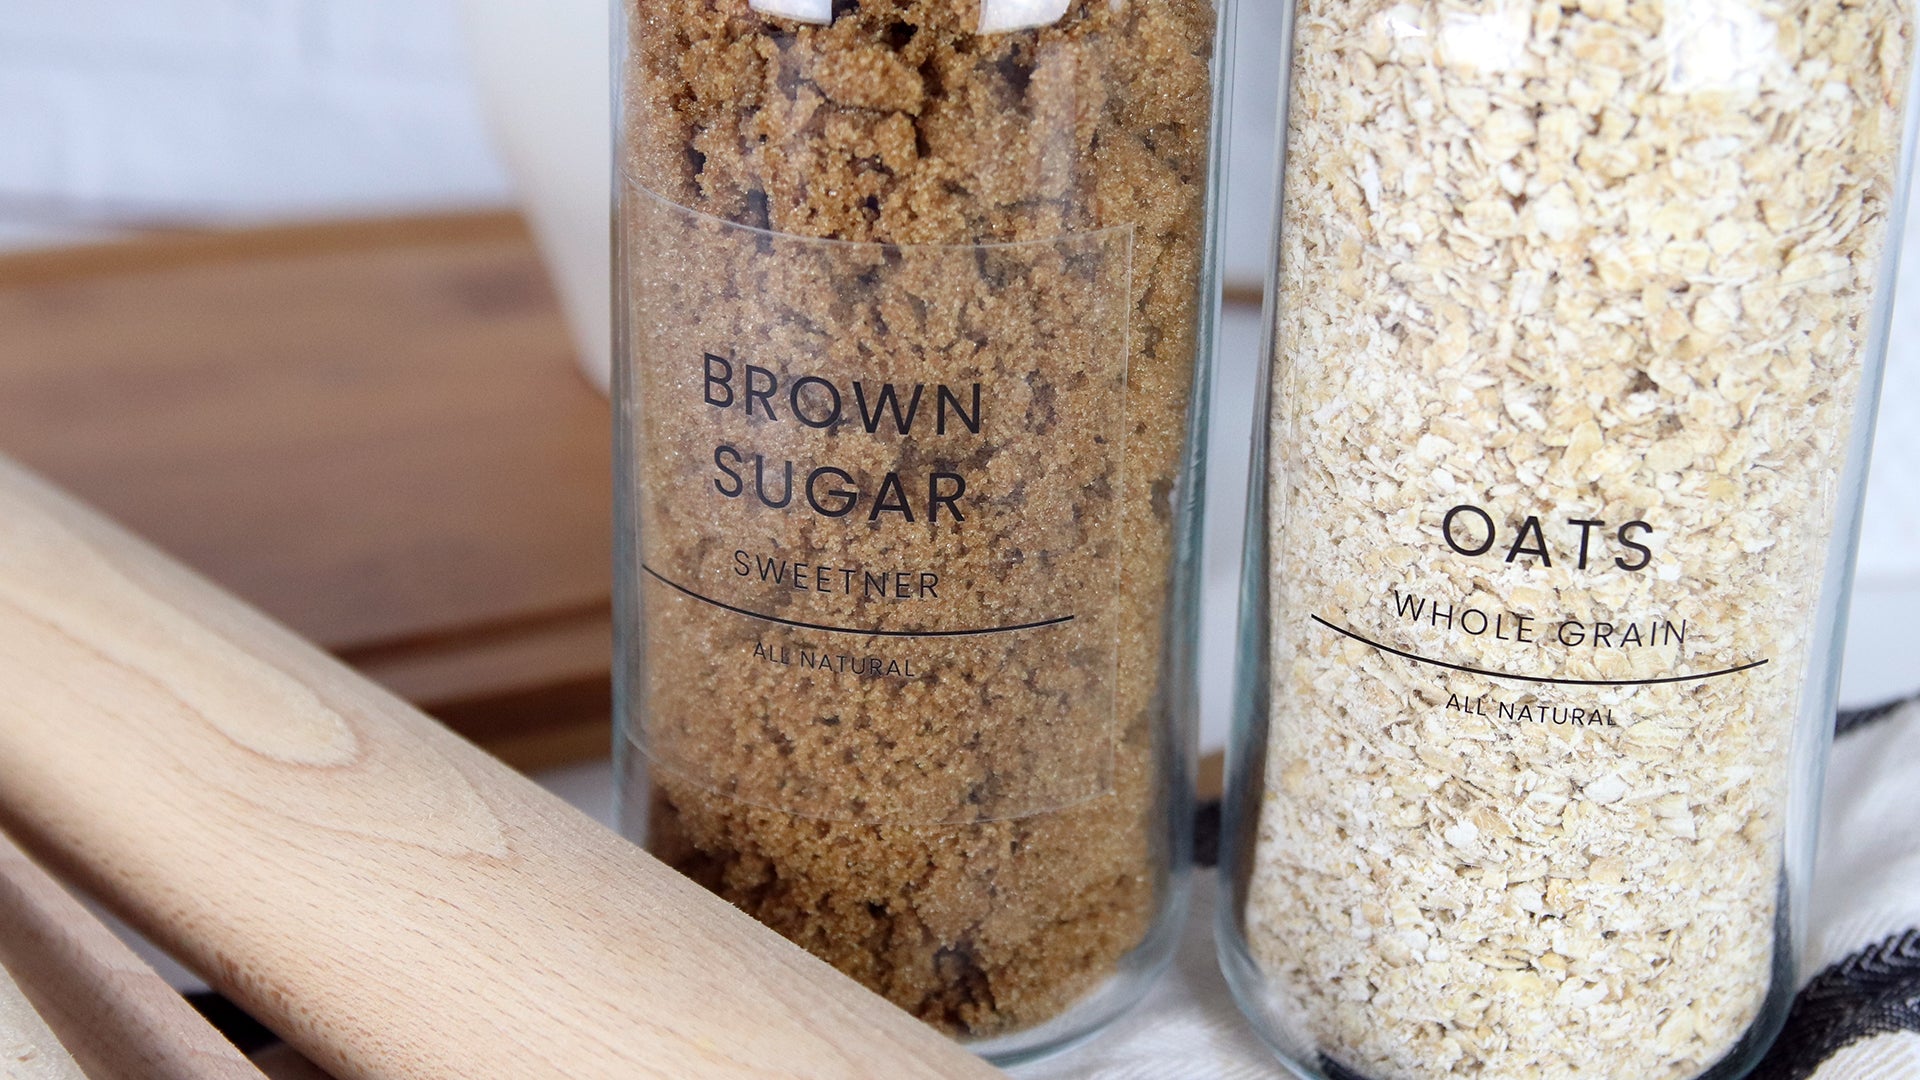 Clear eco friendly stickers applied to glass containers with brown sugar and oats